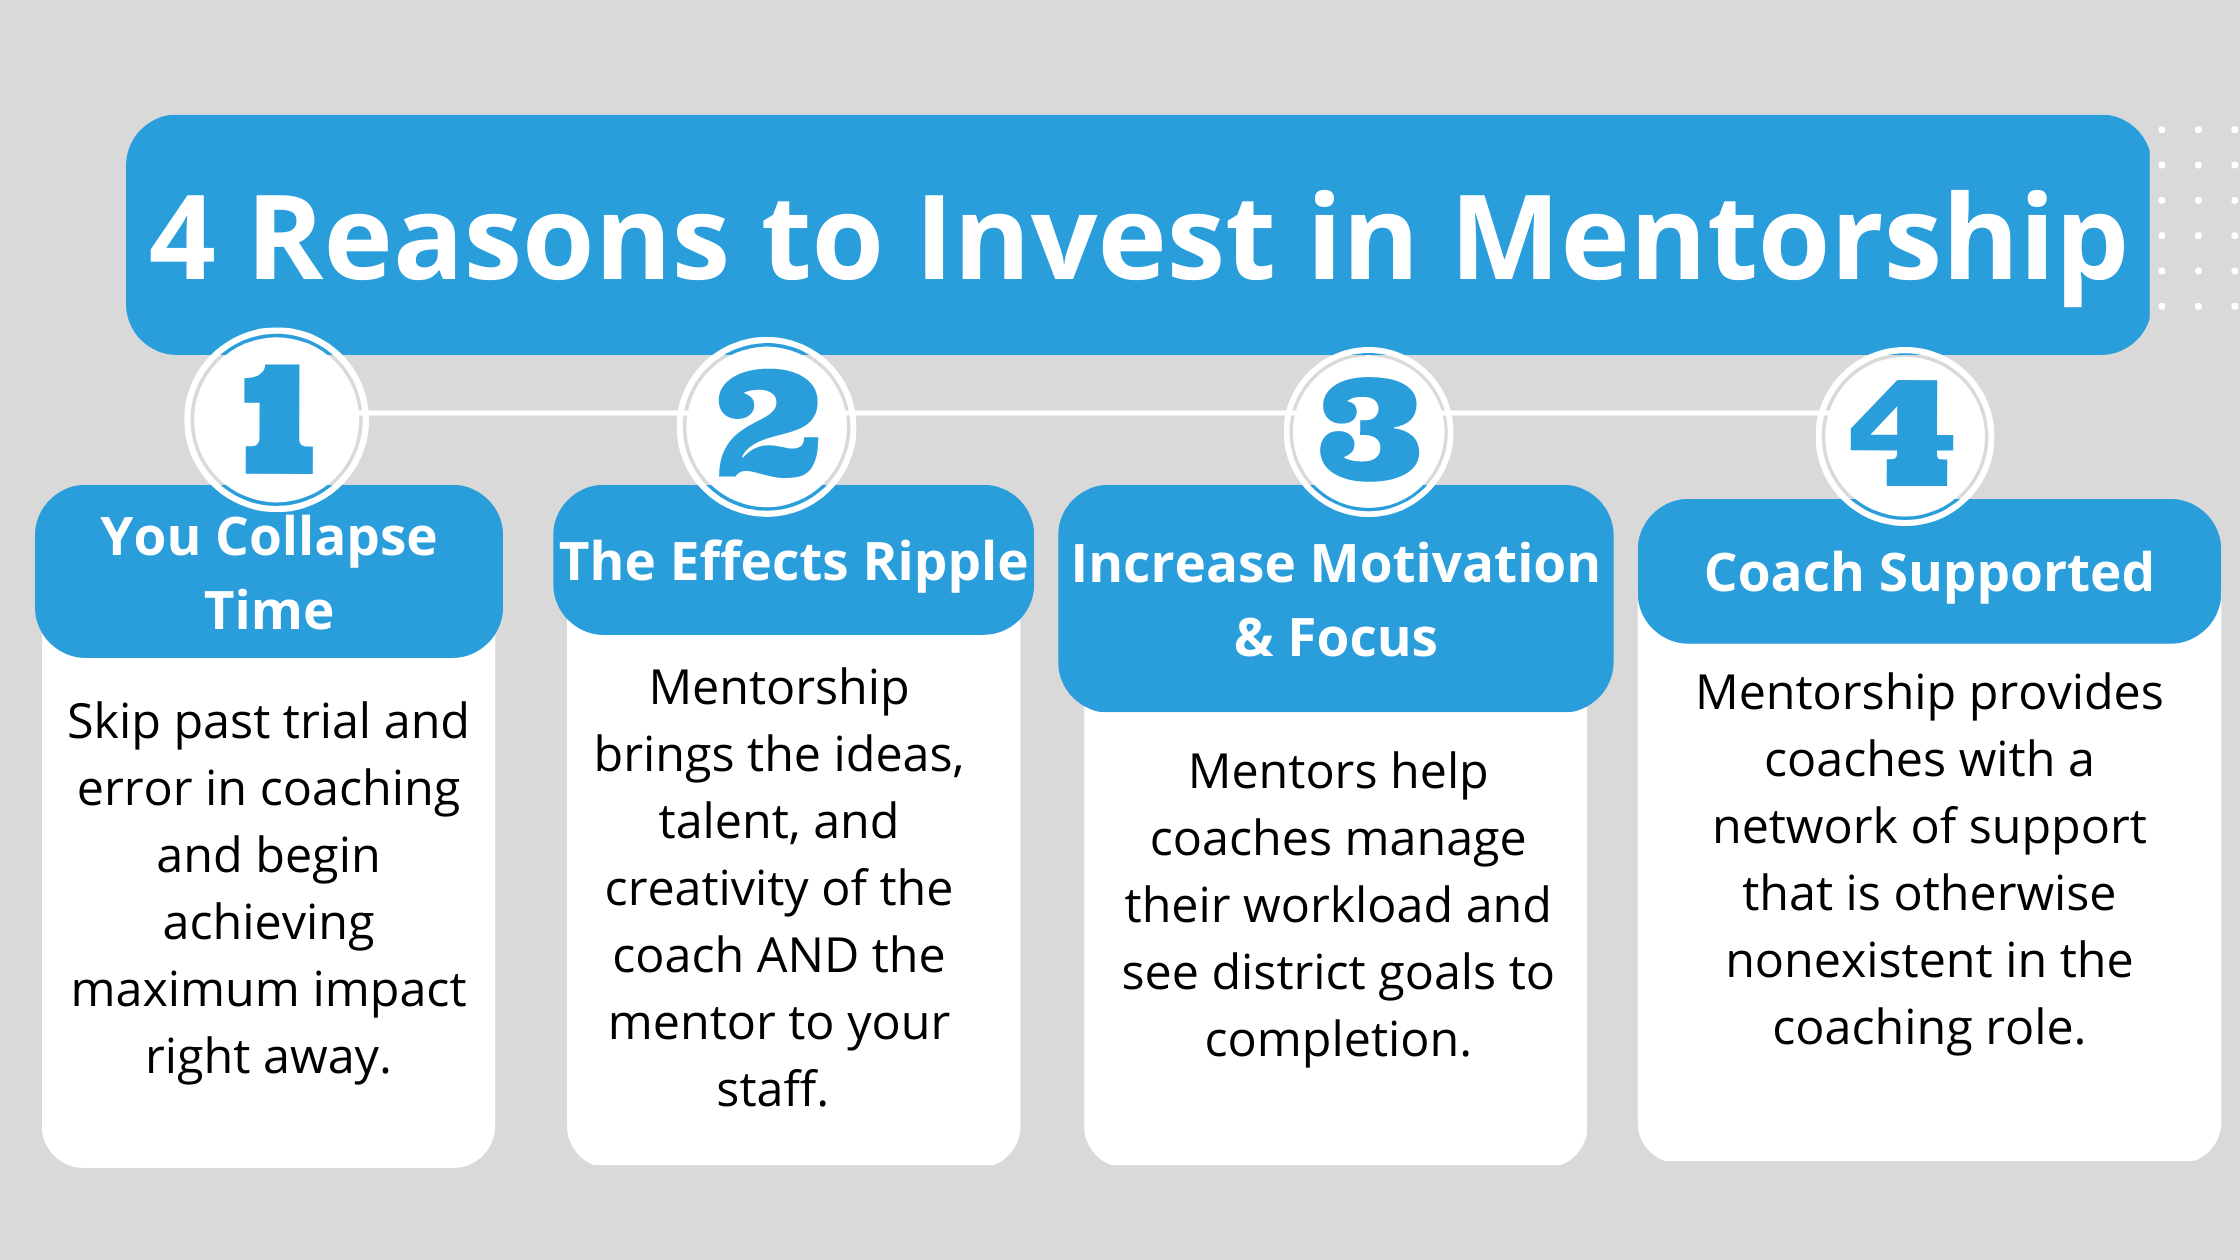 4 Reasons to Invest Mentorship with Forward Edge